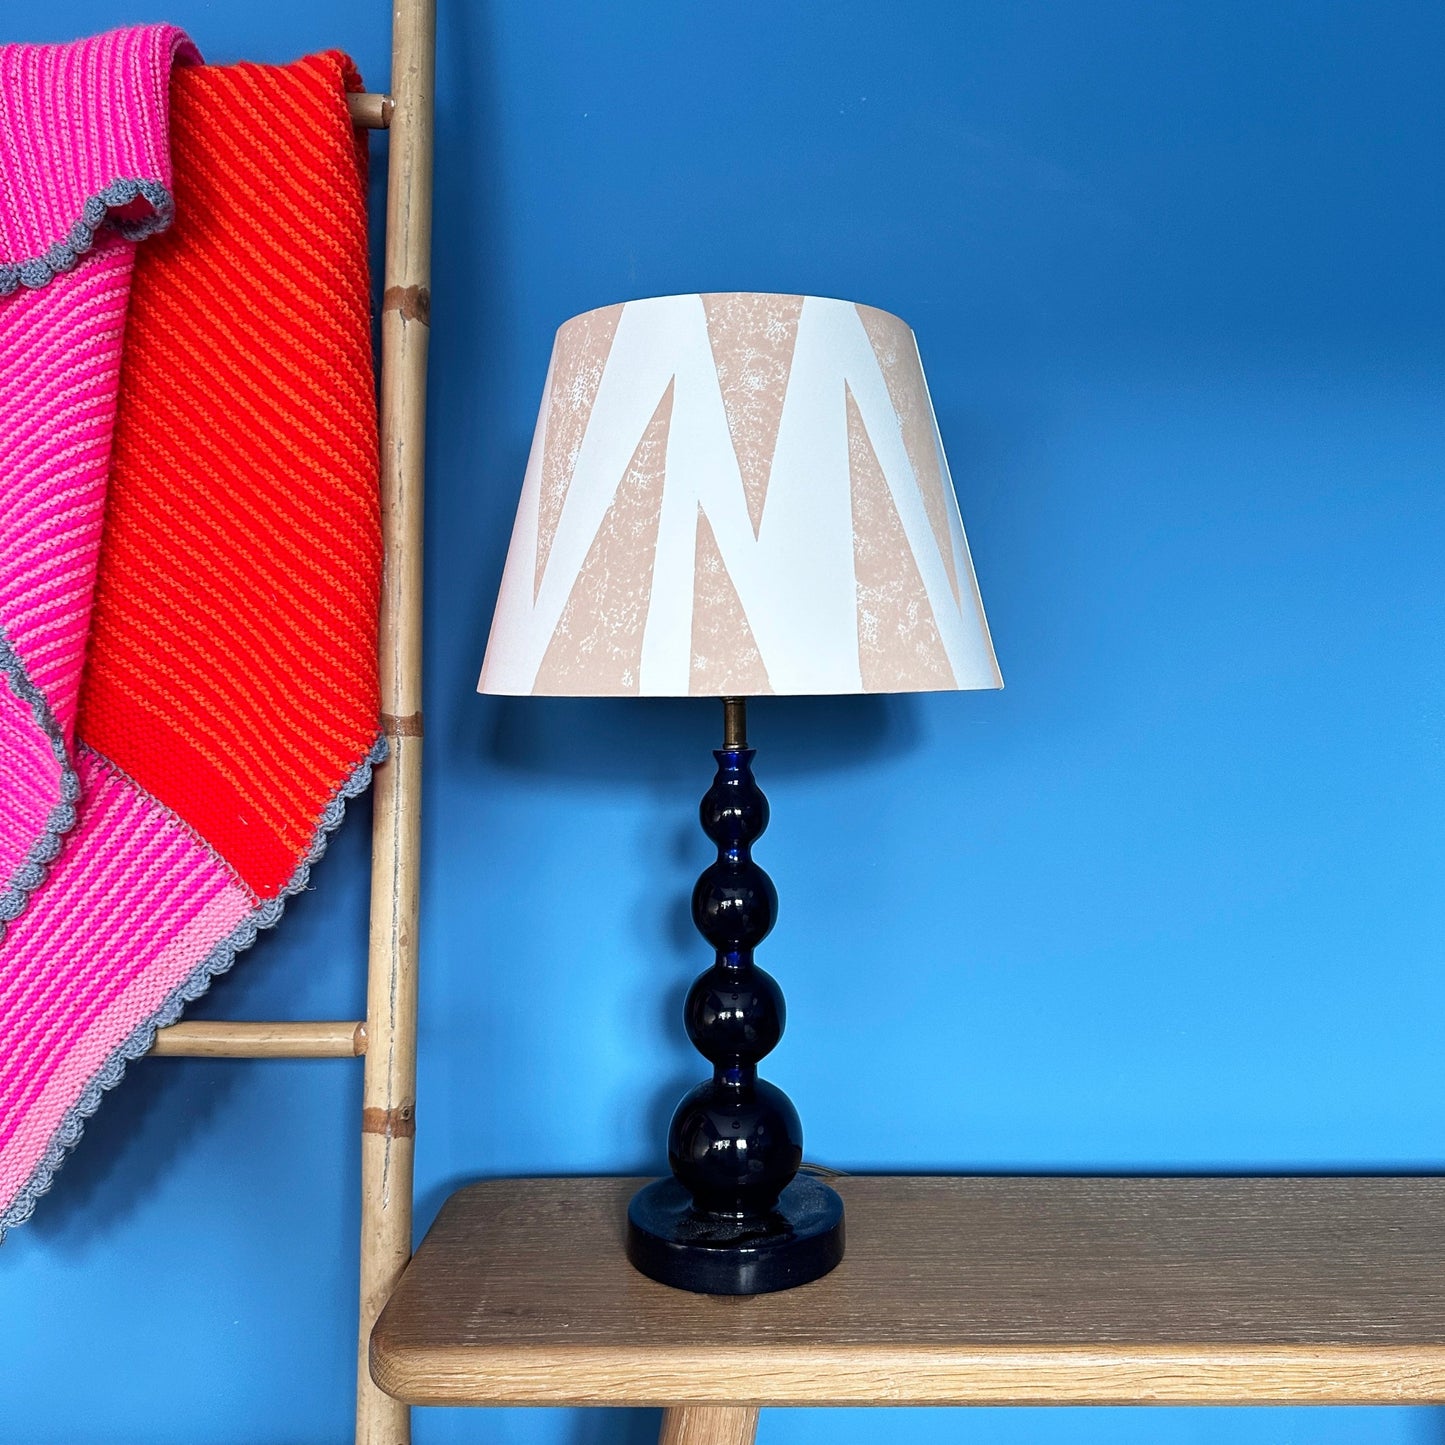 Pink lampshade with triangle pattern with blue background